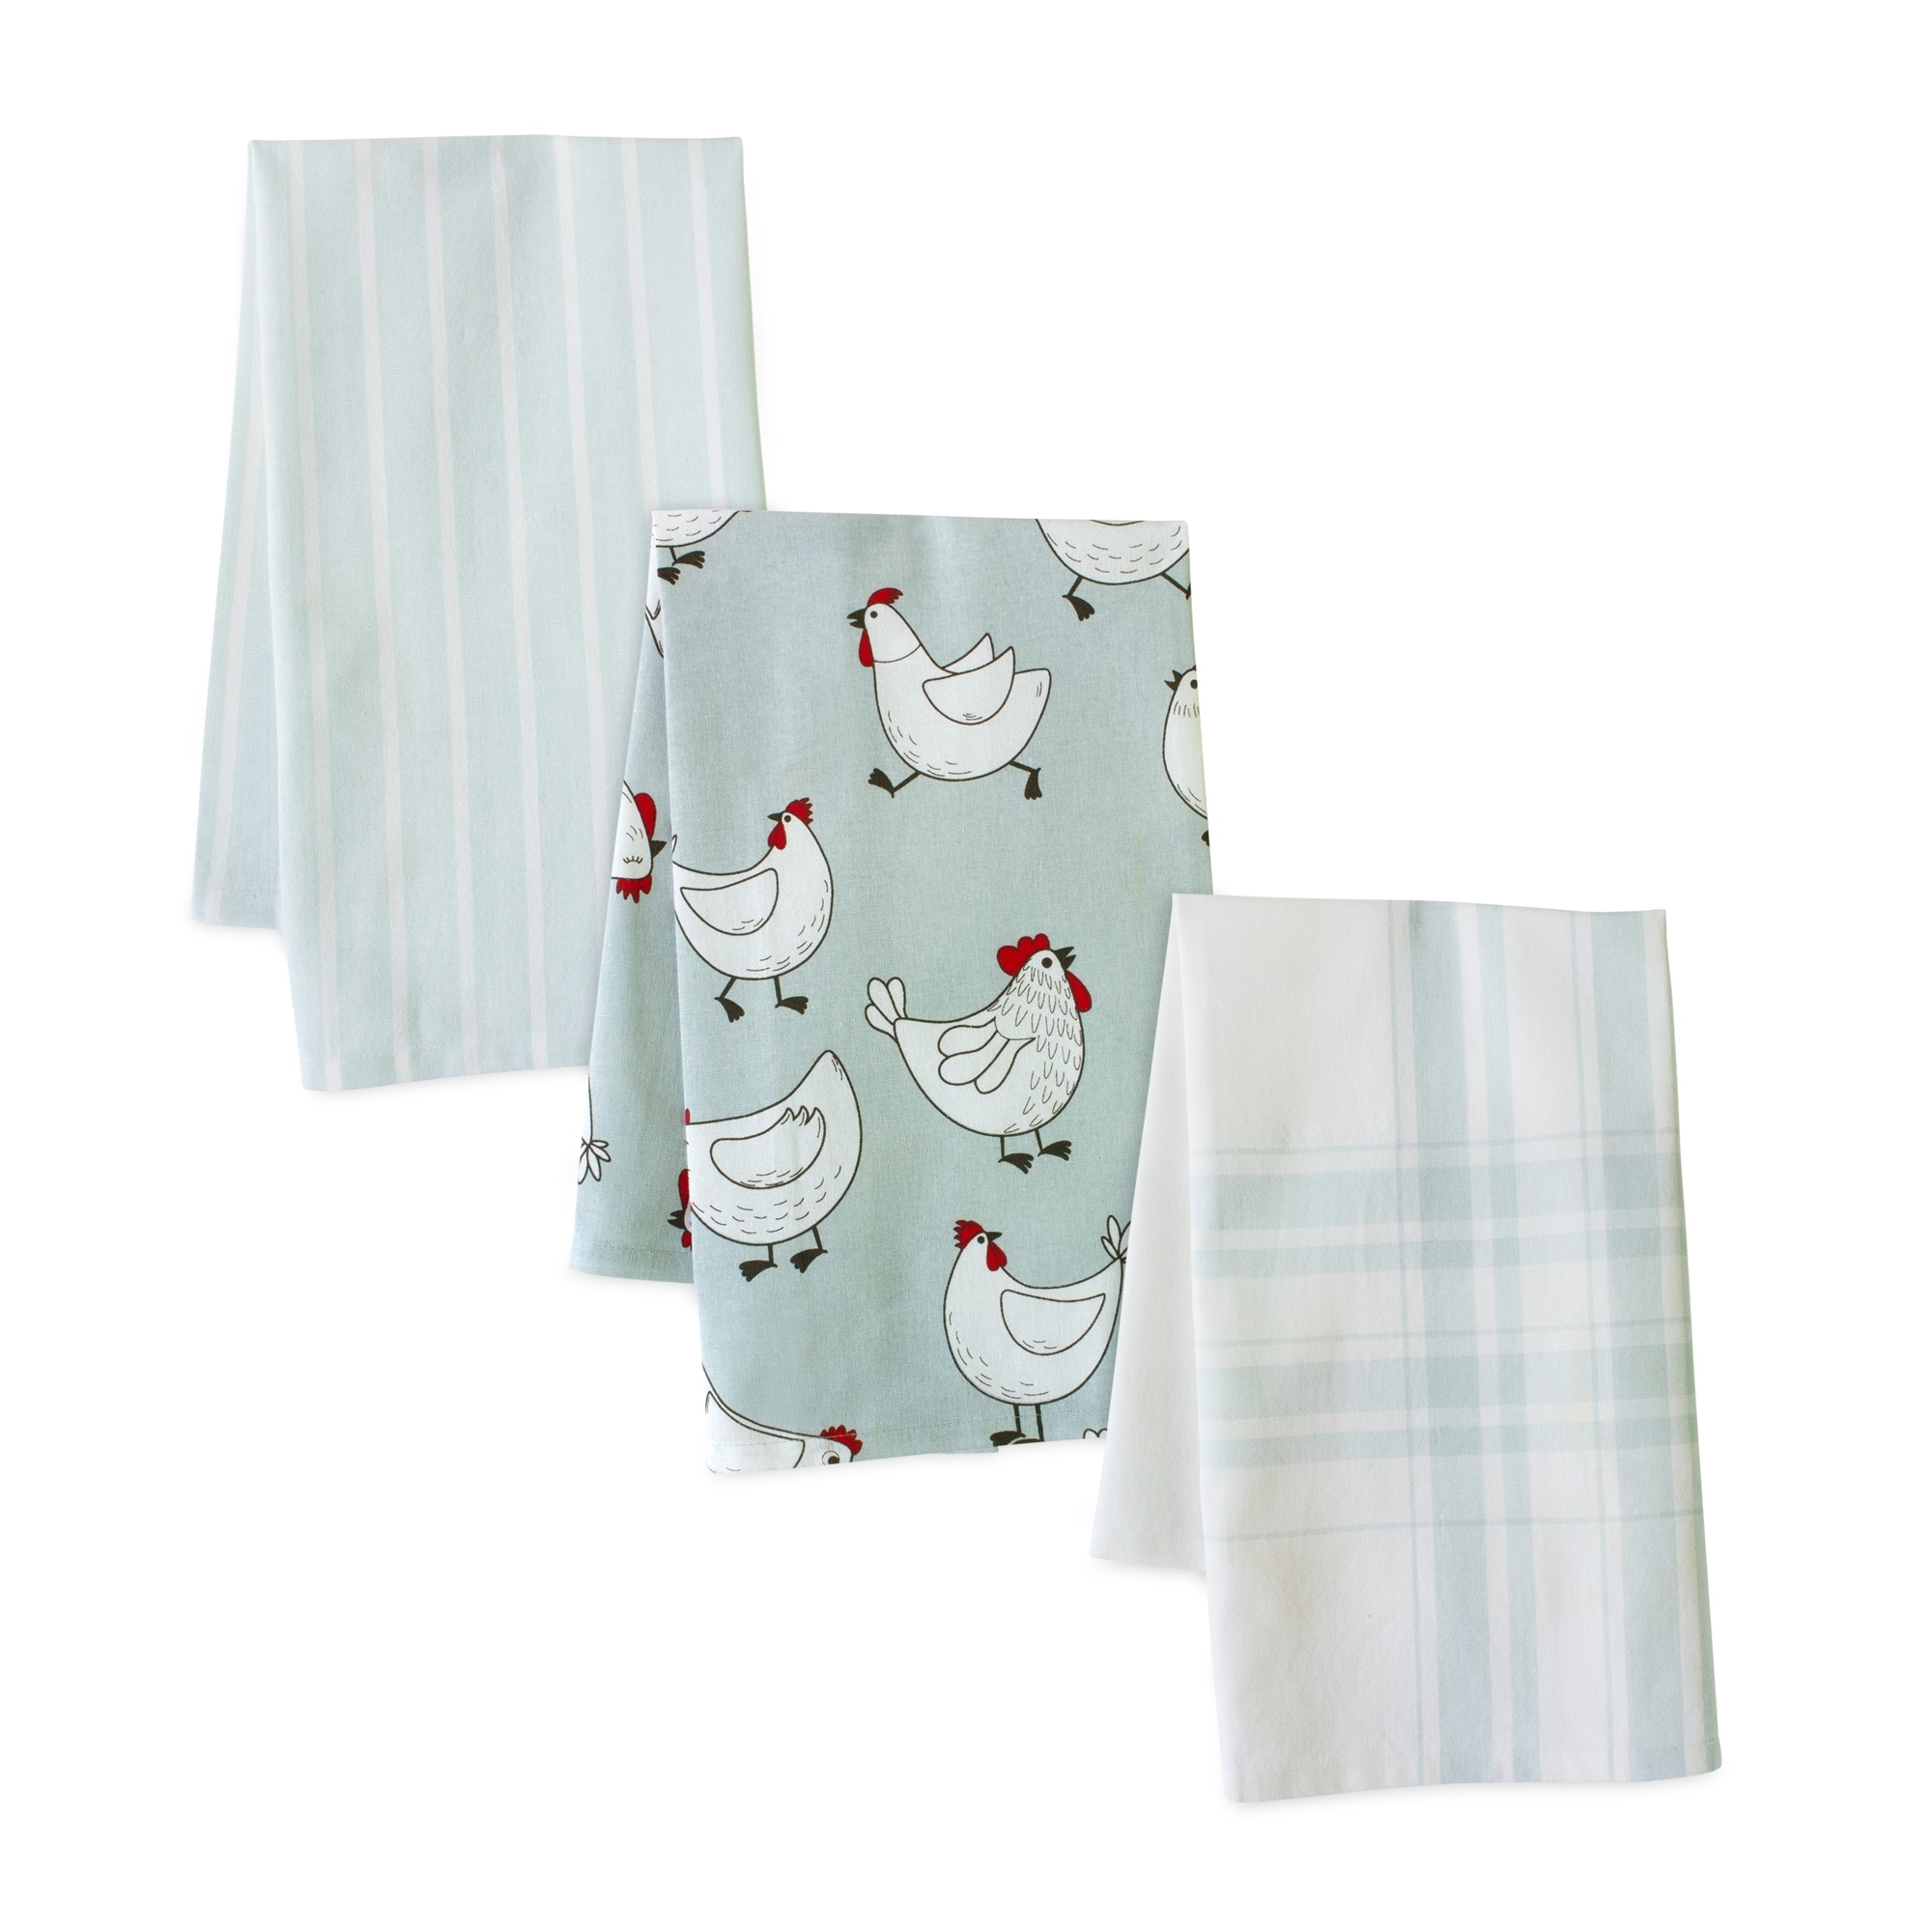 https://ak1.ostkcdn.com/images/products/is/images/direct/b73d29789a0b32b444c1c03315e65d94c0b6c21a/Cotton-Tea-Towel-%28Set-of-3%29.jpg